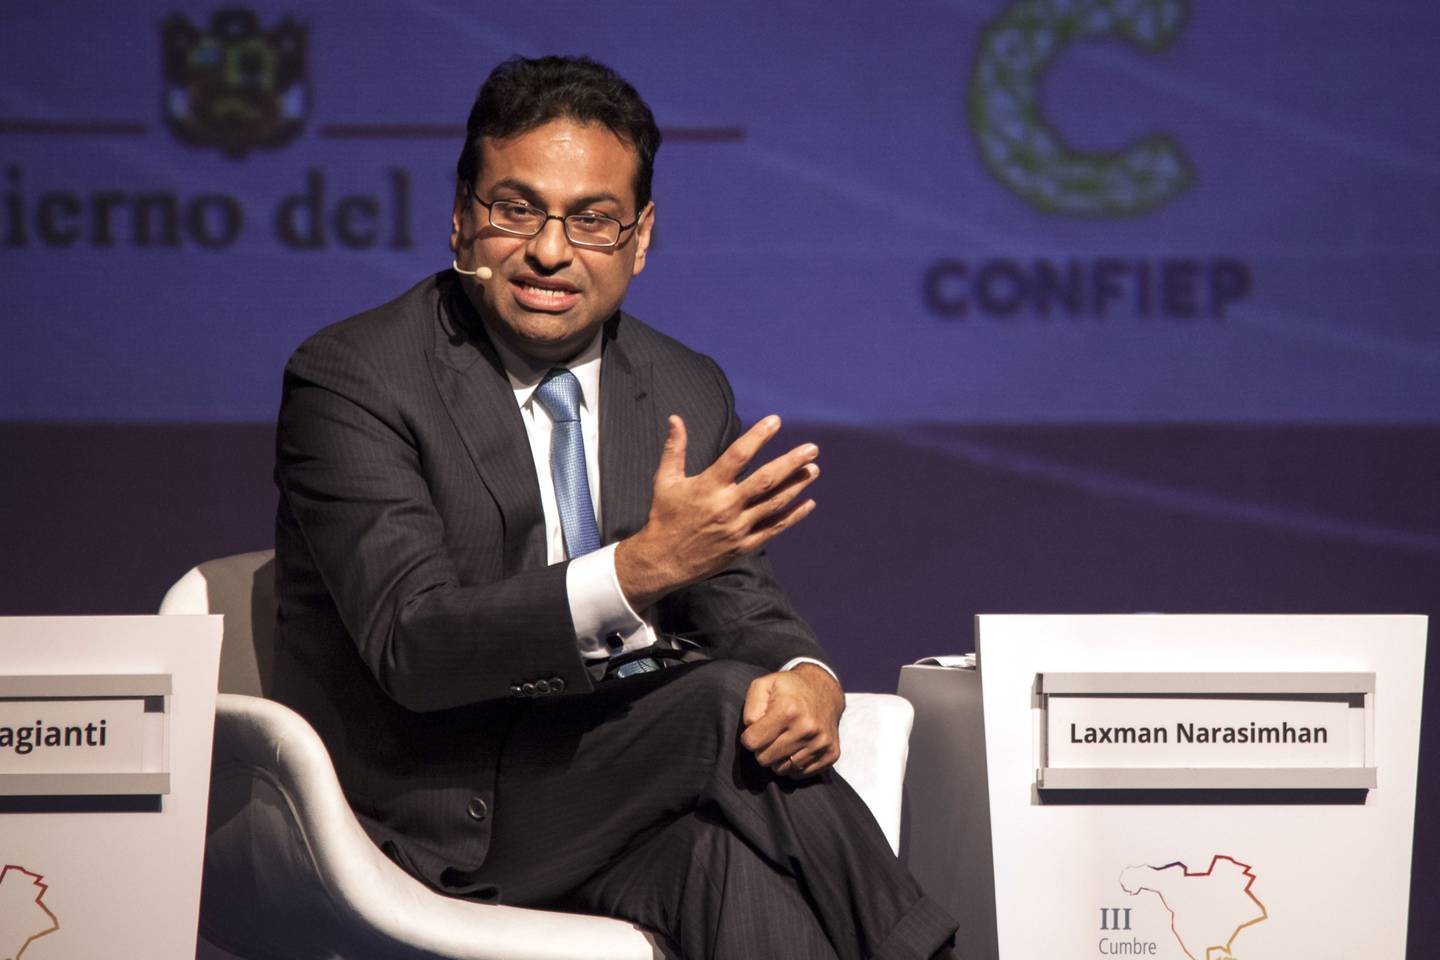 Laxman Narasimhan, former CEO of Latin America at PepsiCo Inc. and ex executive at Reckitt Benckiser Group Plc. will join the Seattle-based company in October and embark on an extended tour of its operations before becoming CEO in April.dfd